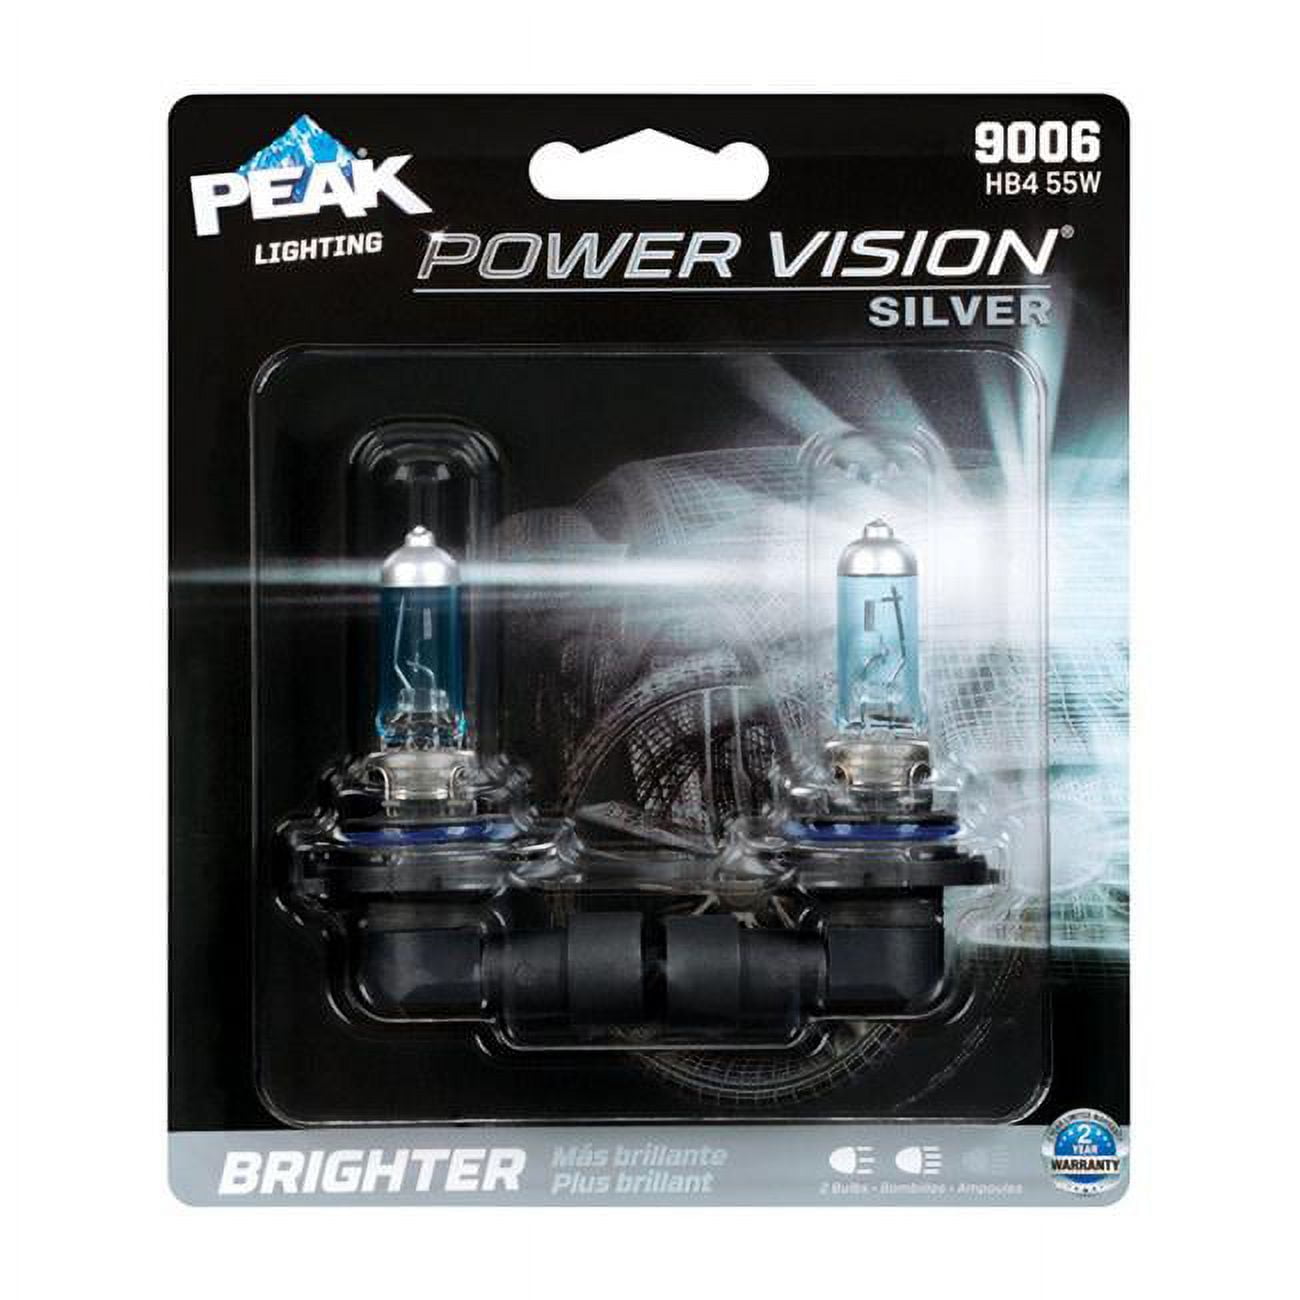 8020169 Power Vision Silver 12.8 V Halogen T4 Automotive Bulb - 9006 Hb4 55w - Pack Of 2